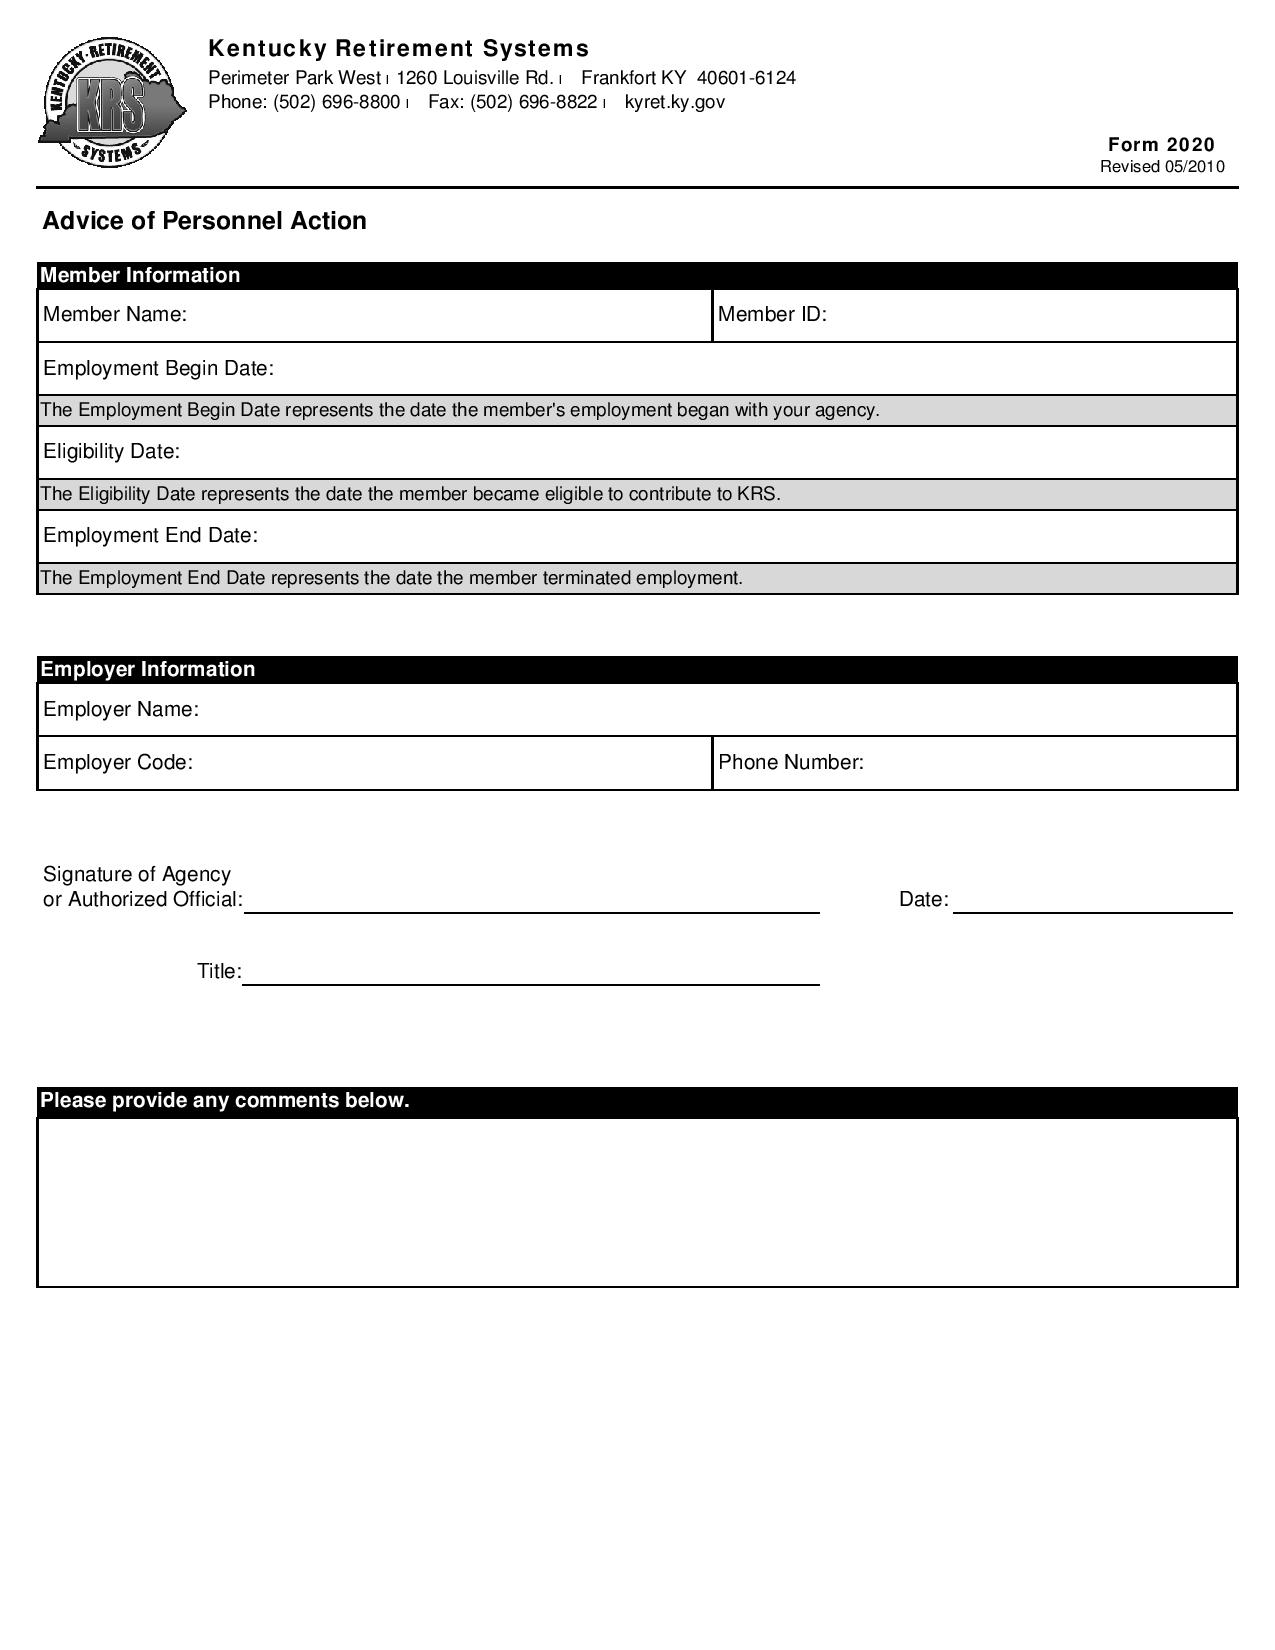 advice of personnel action form page 001